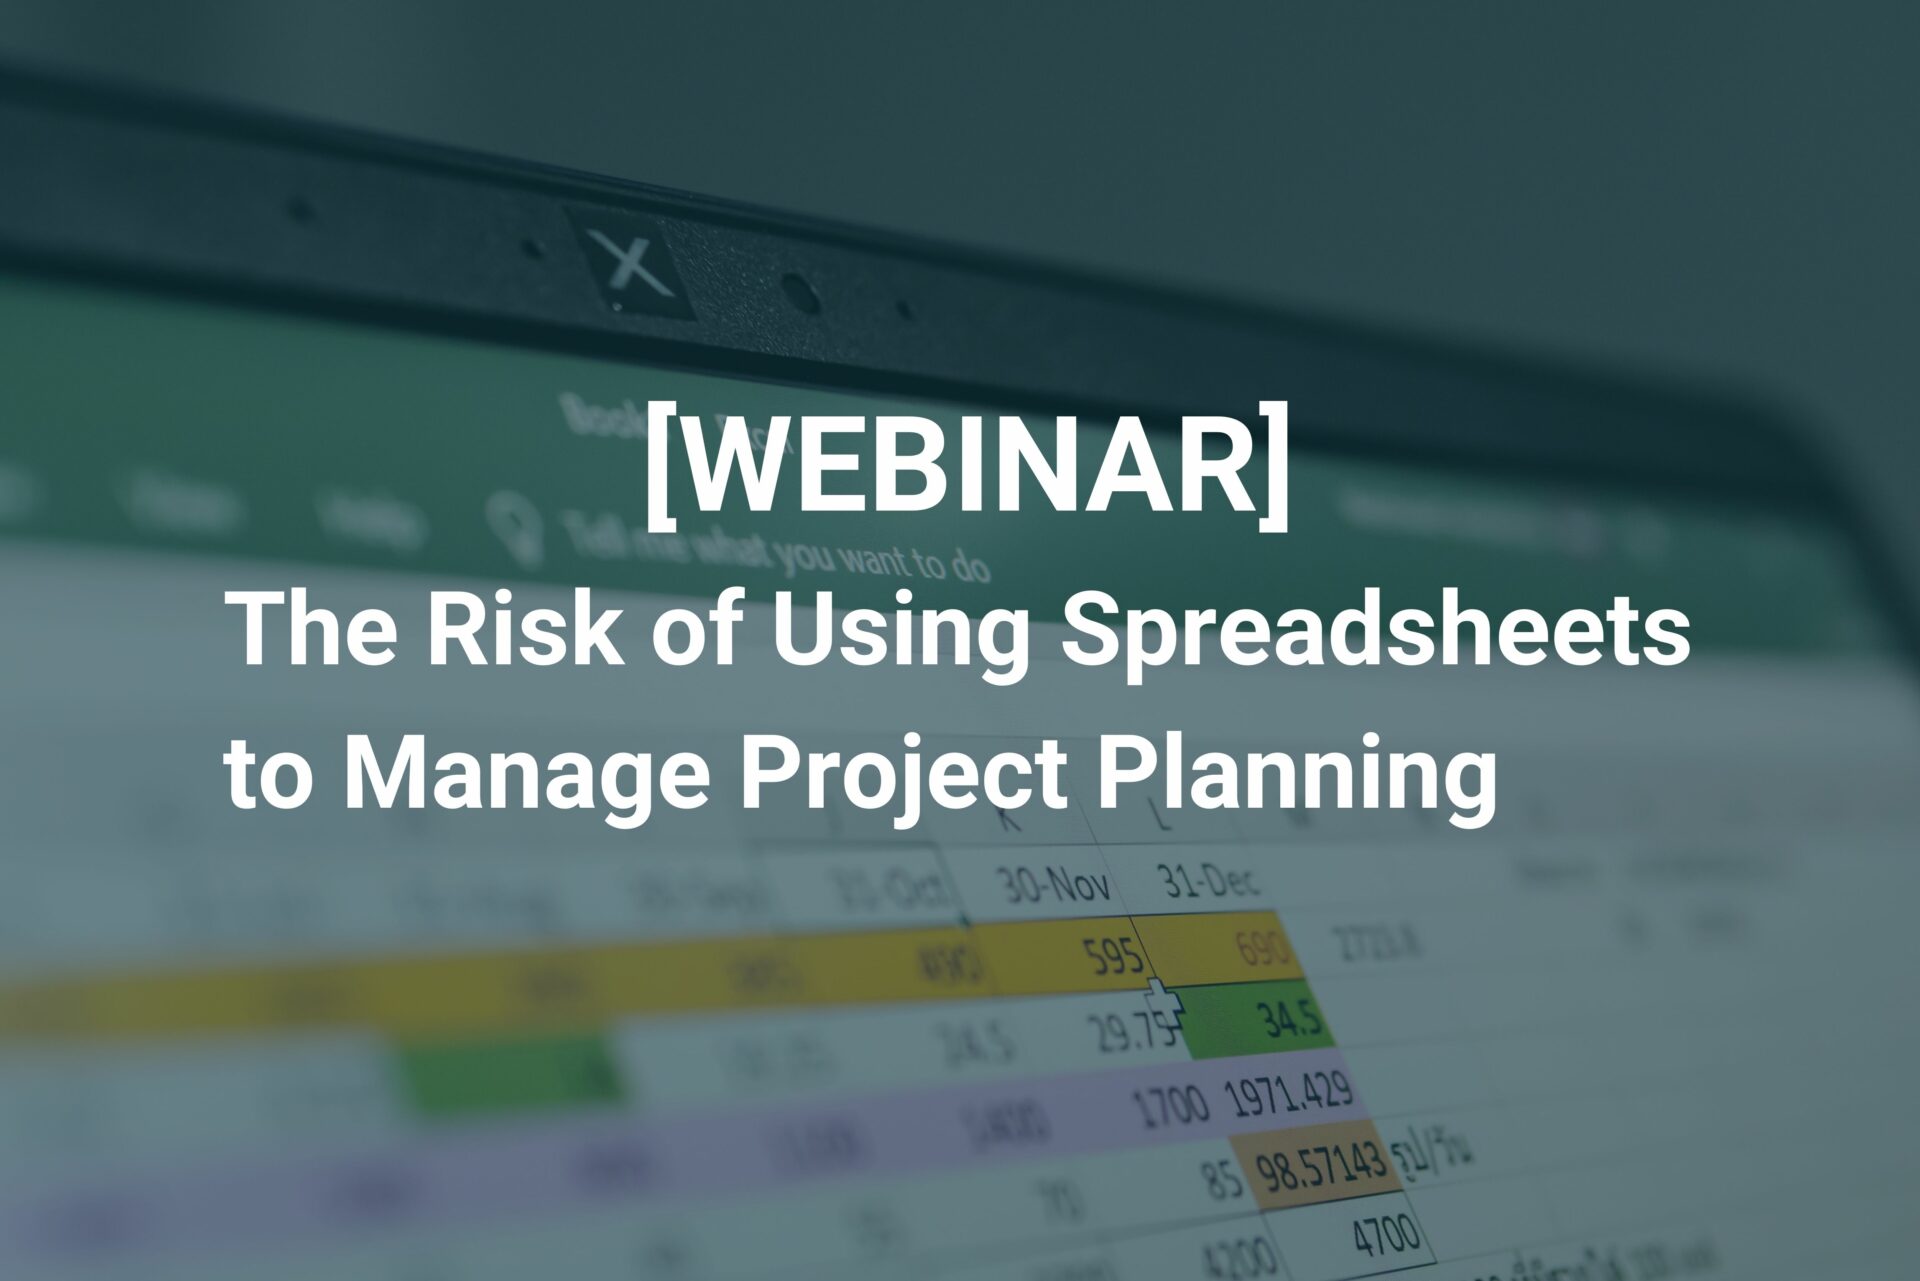 Webinar - The Risk of Using Spreadsheets to Manage Project Planning